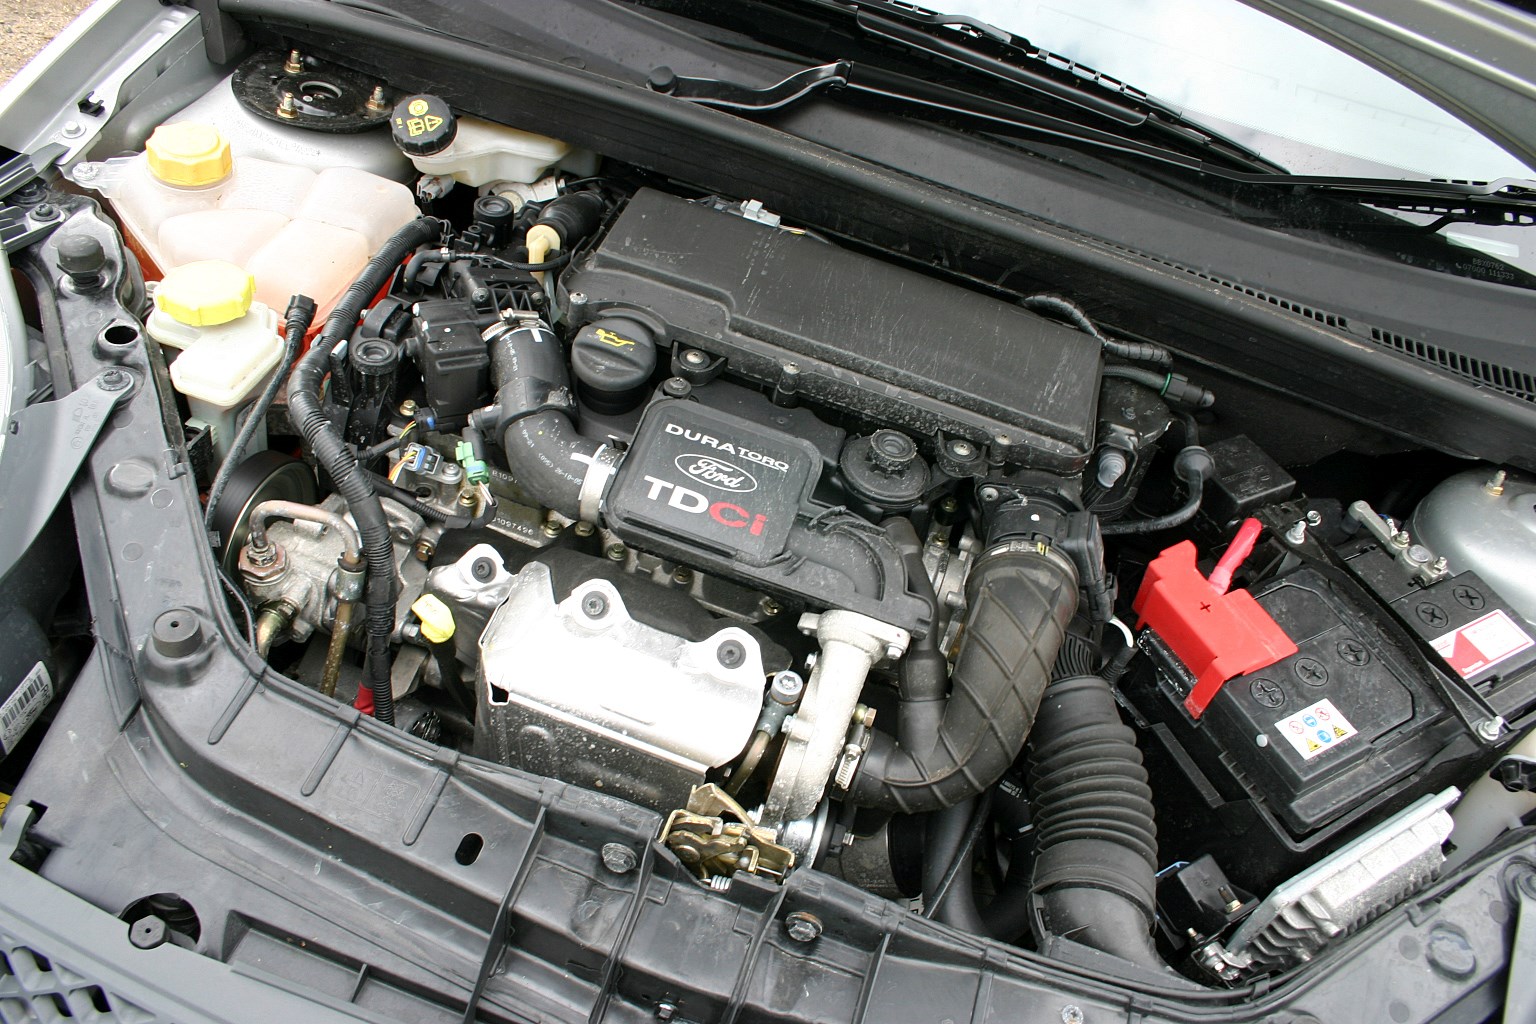 Ford Focus Engine Bay Layout - Ford Focus Review